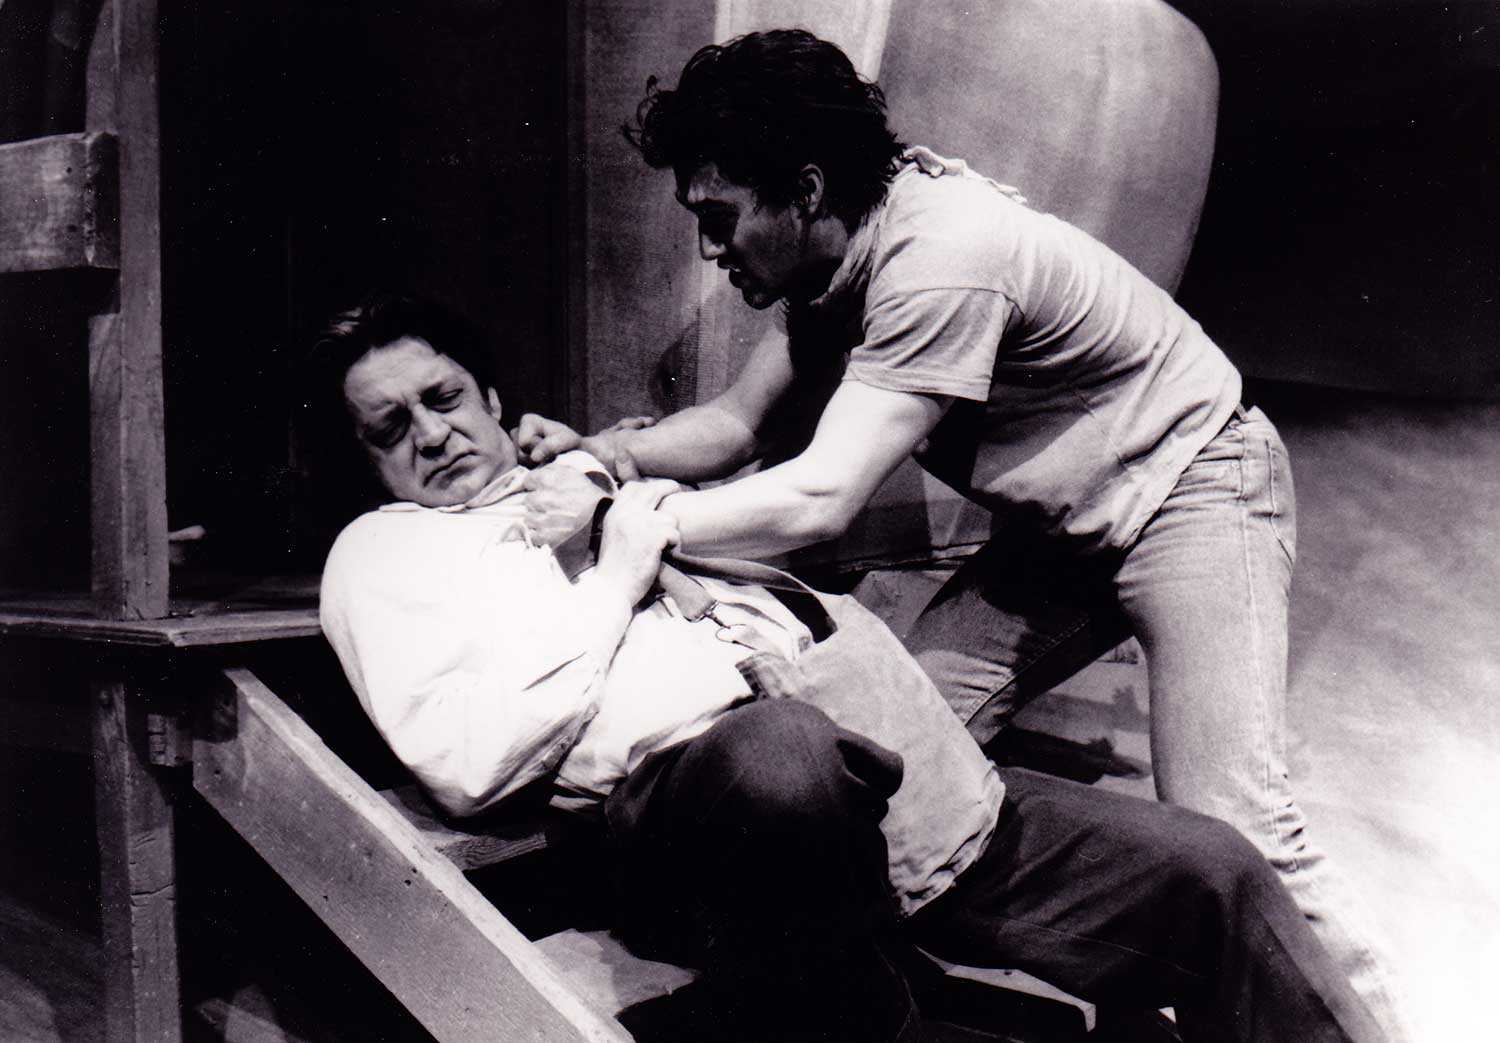 A scene from Le Chien, a play by Jean Marc Dalpé, from Théâtre du Nouvel-Ontario’s 1987-88 season. Used with permission.